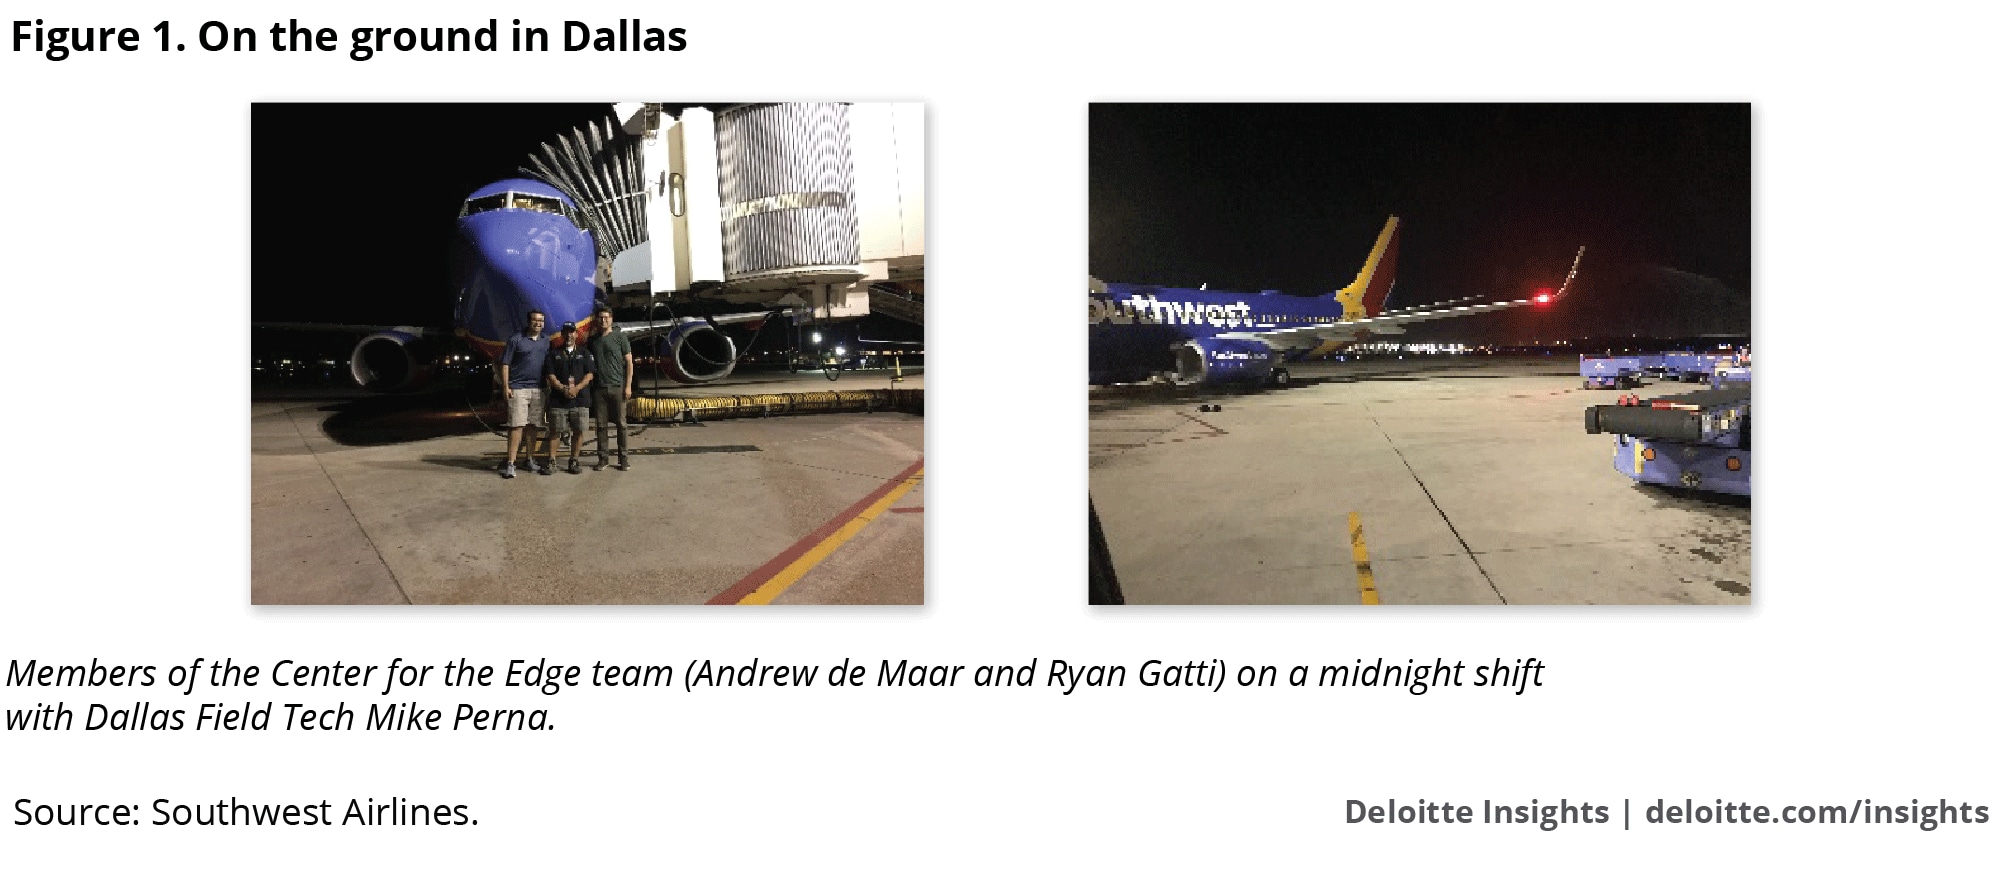 On the ground in Dallas